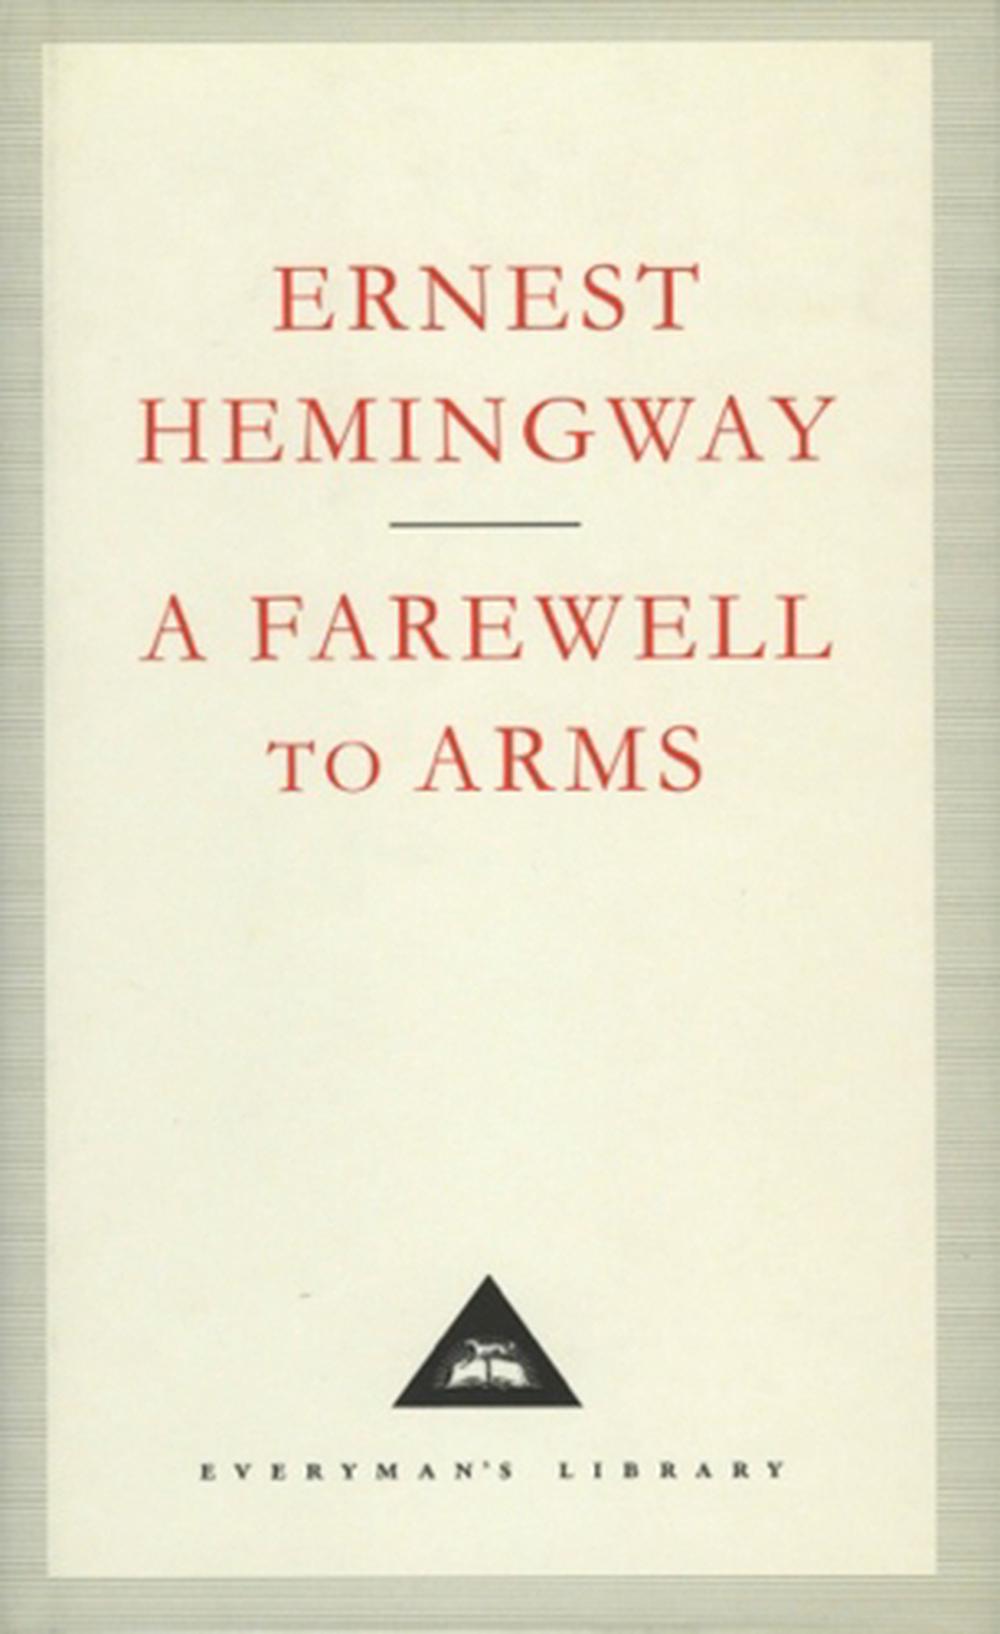 a farewell to arms by ernest hemingway